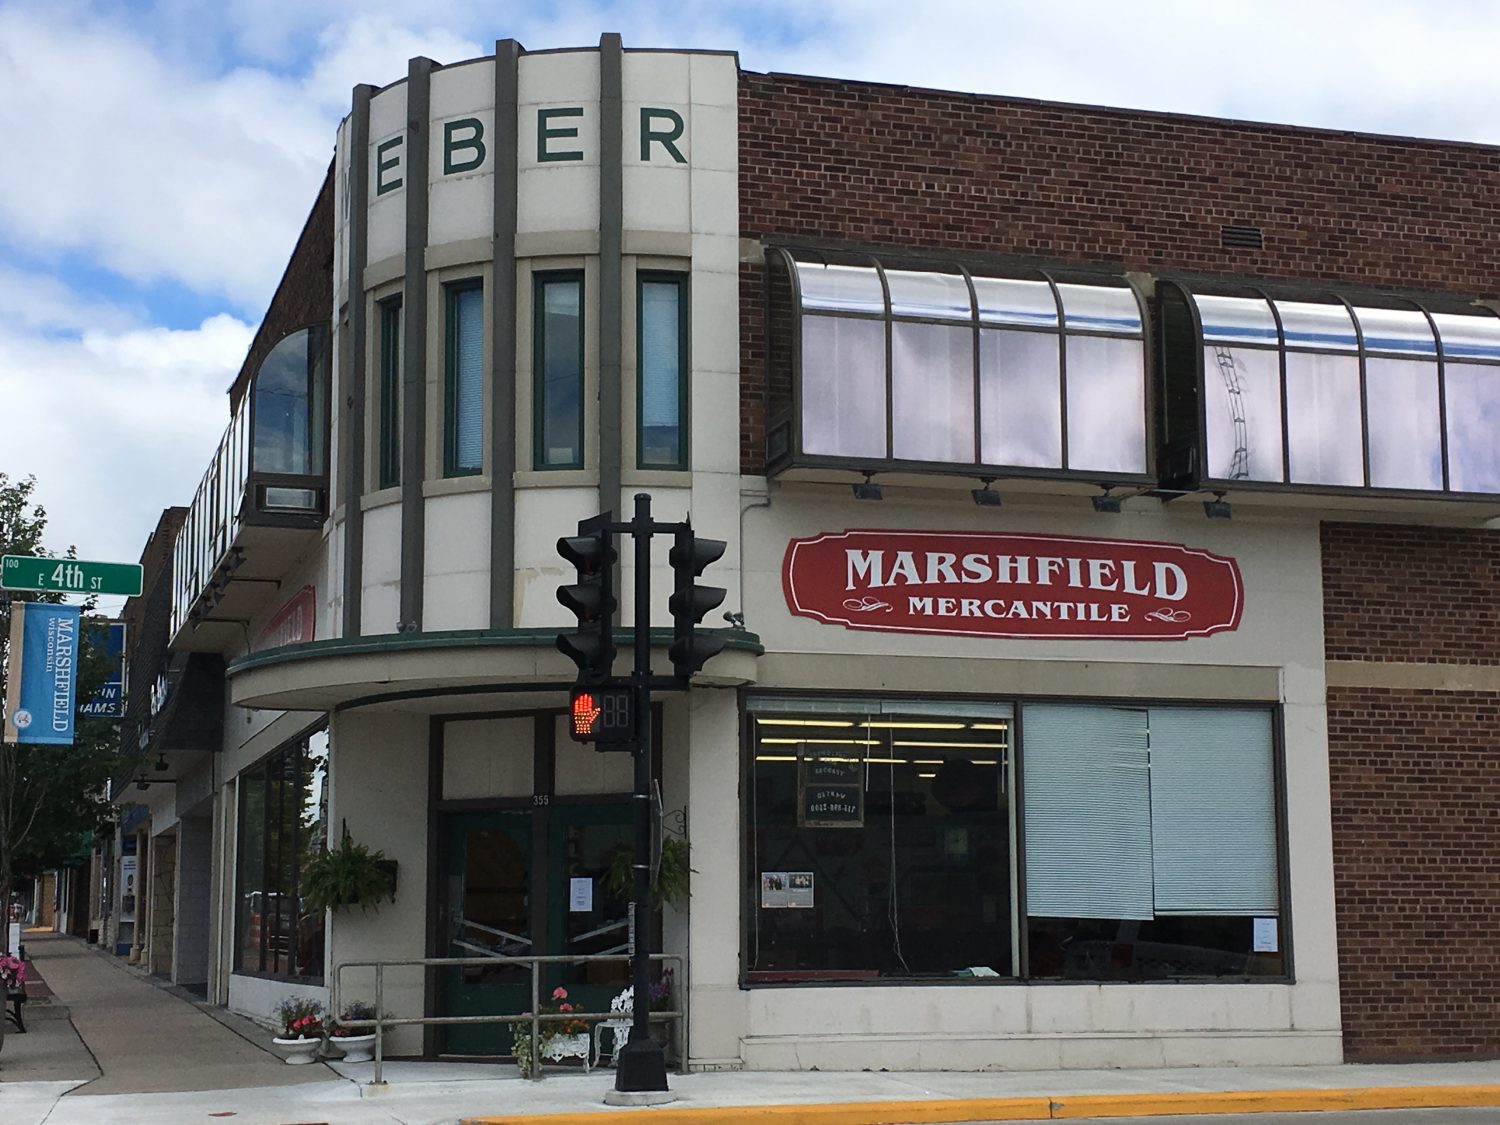 Marshfield Merchantile held a soft opening on July 15. A grand opening is being planned for August.